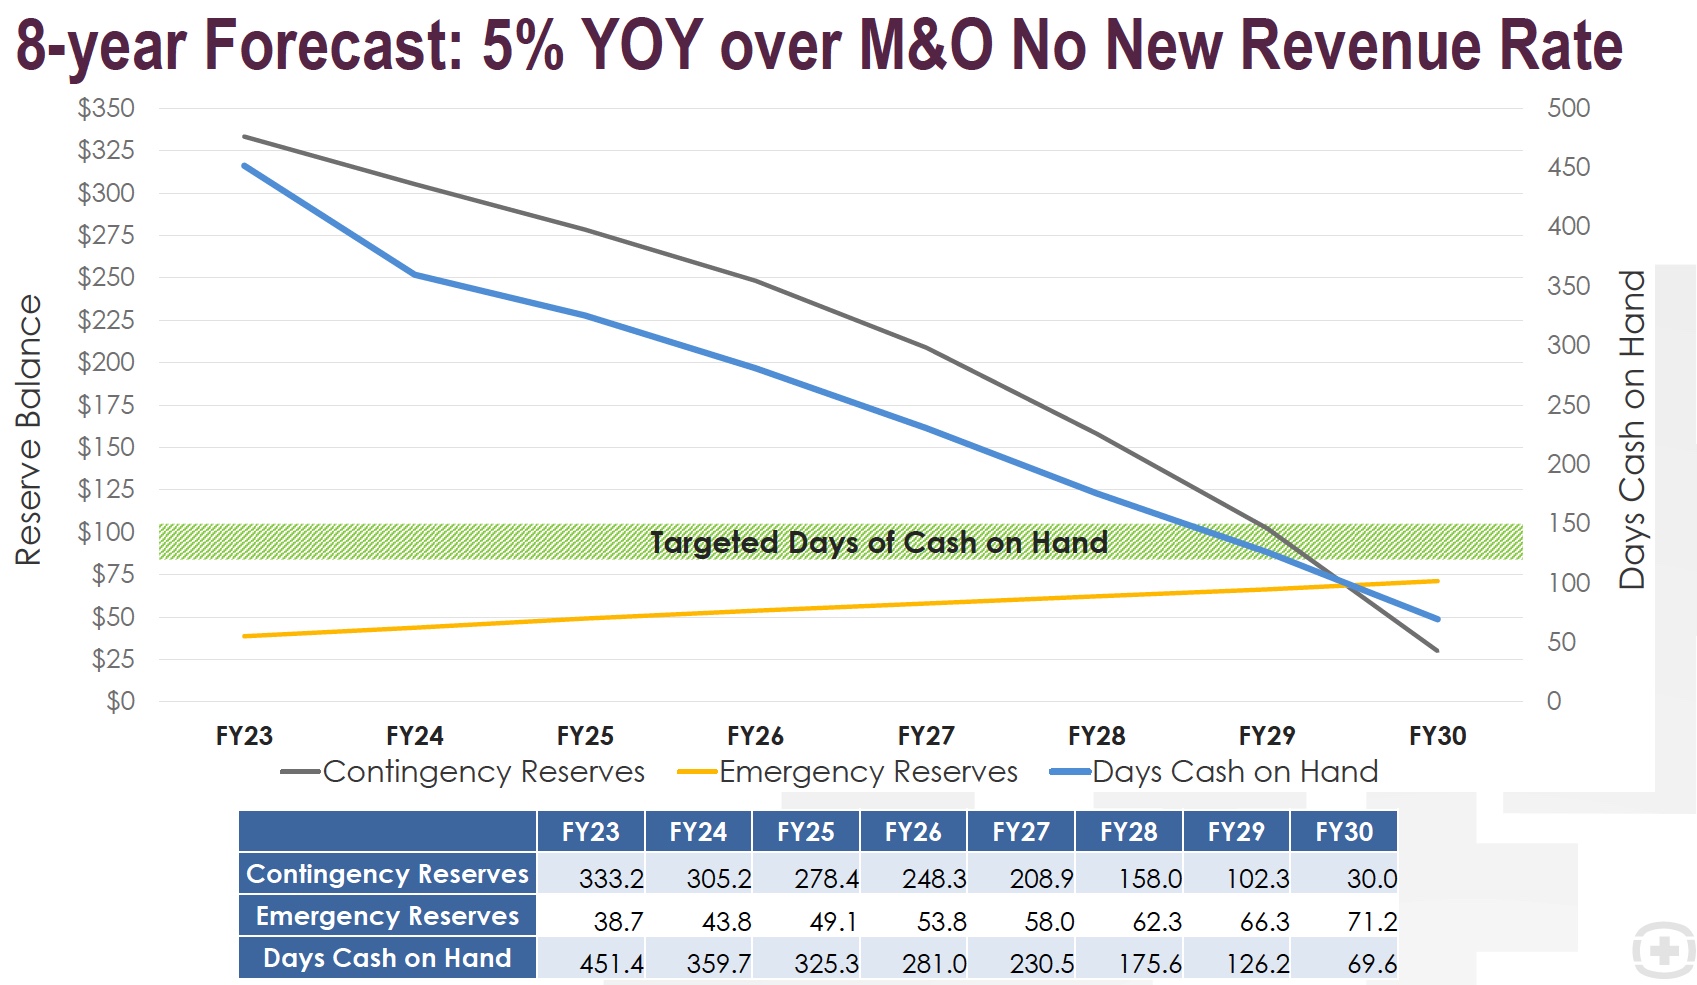 8-year Forecast: 5% YOY over M&O No New Revenue Rate